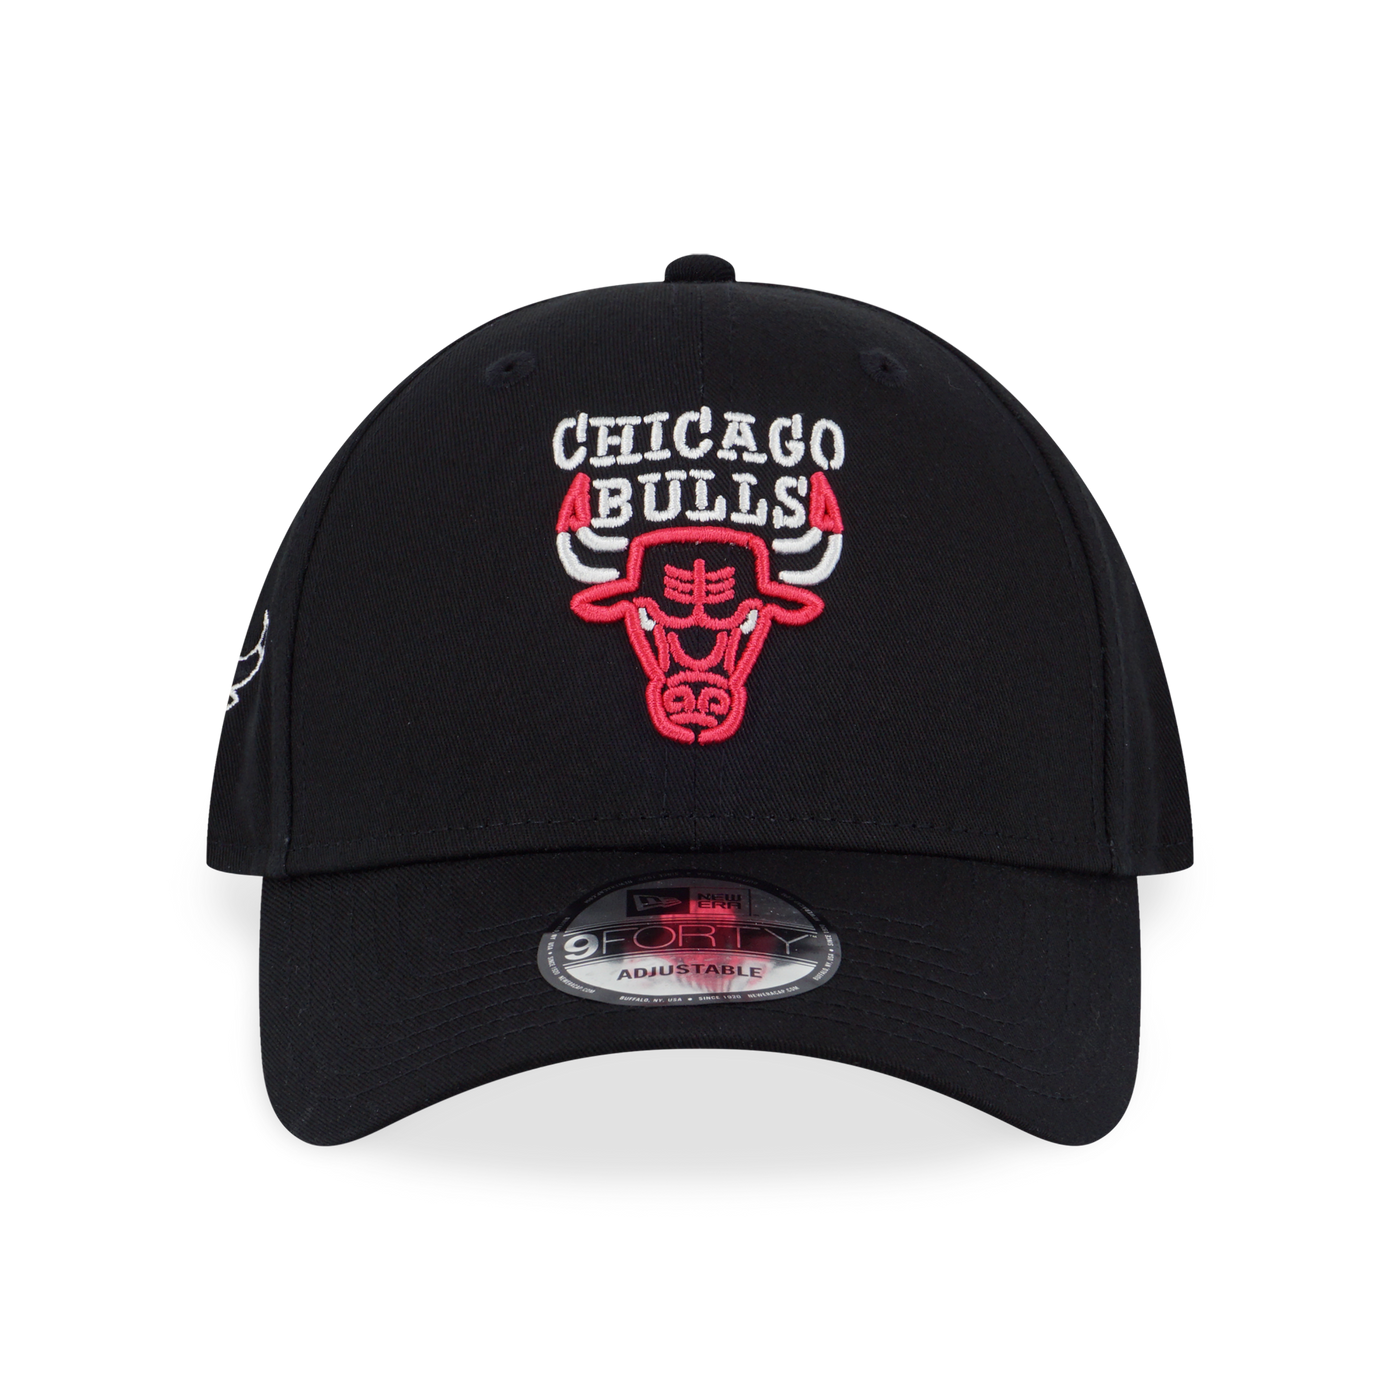 CHICAGO BULLS PARTY VIBE - SUMMER NEON BLACK 9FORTY CAP